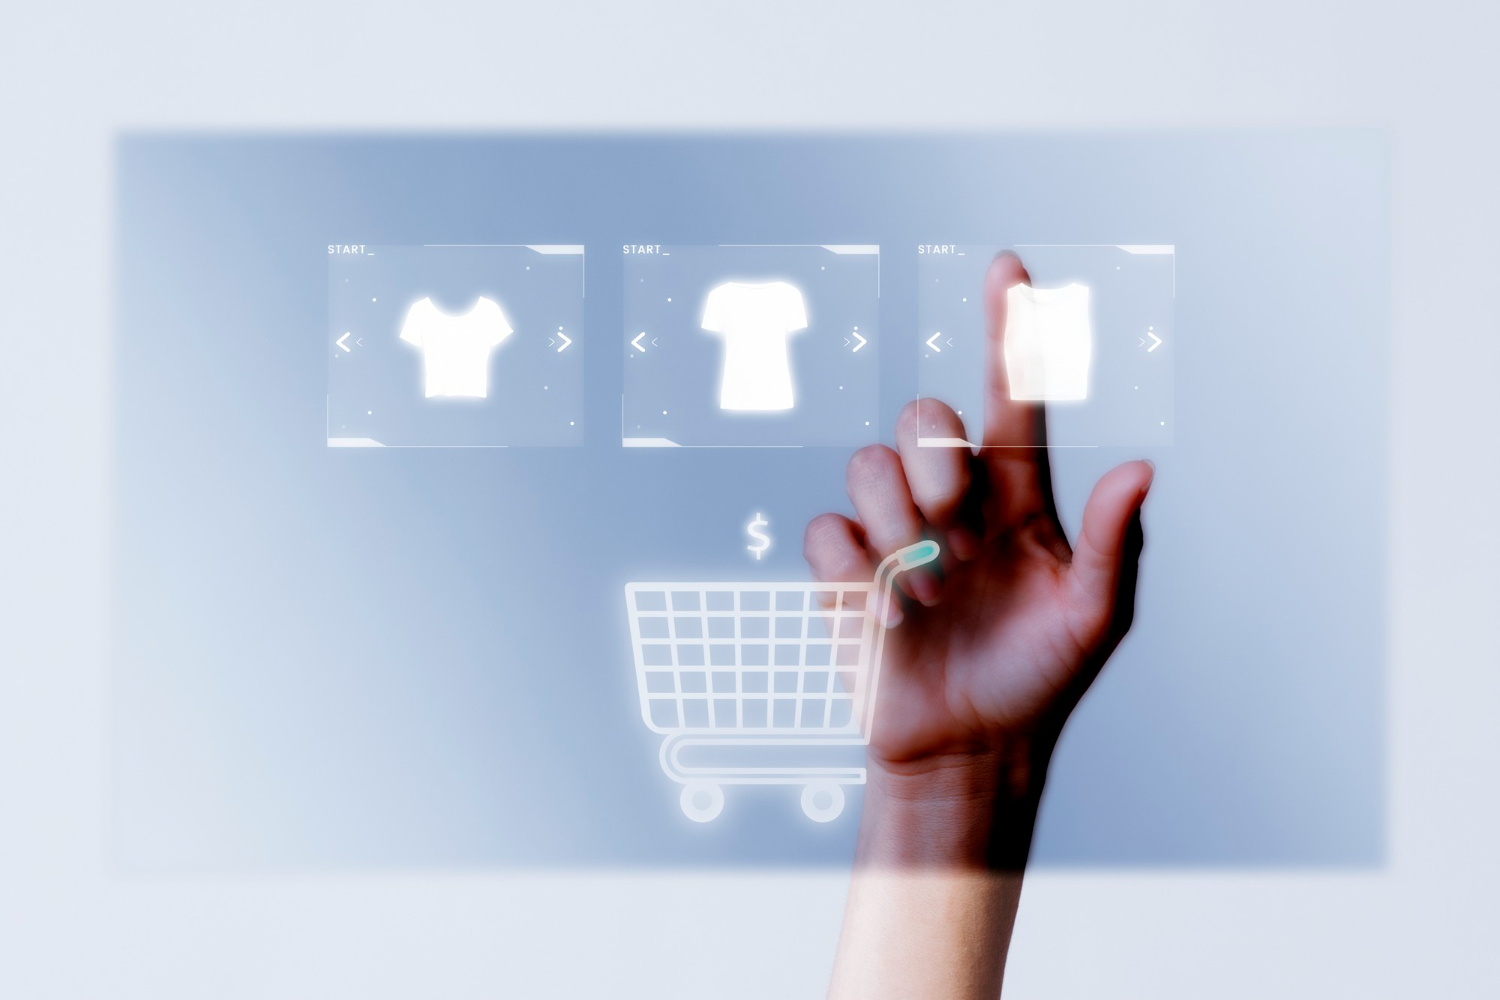 Customer behavior data extracted from e-commerce sites